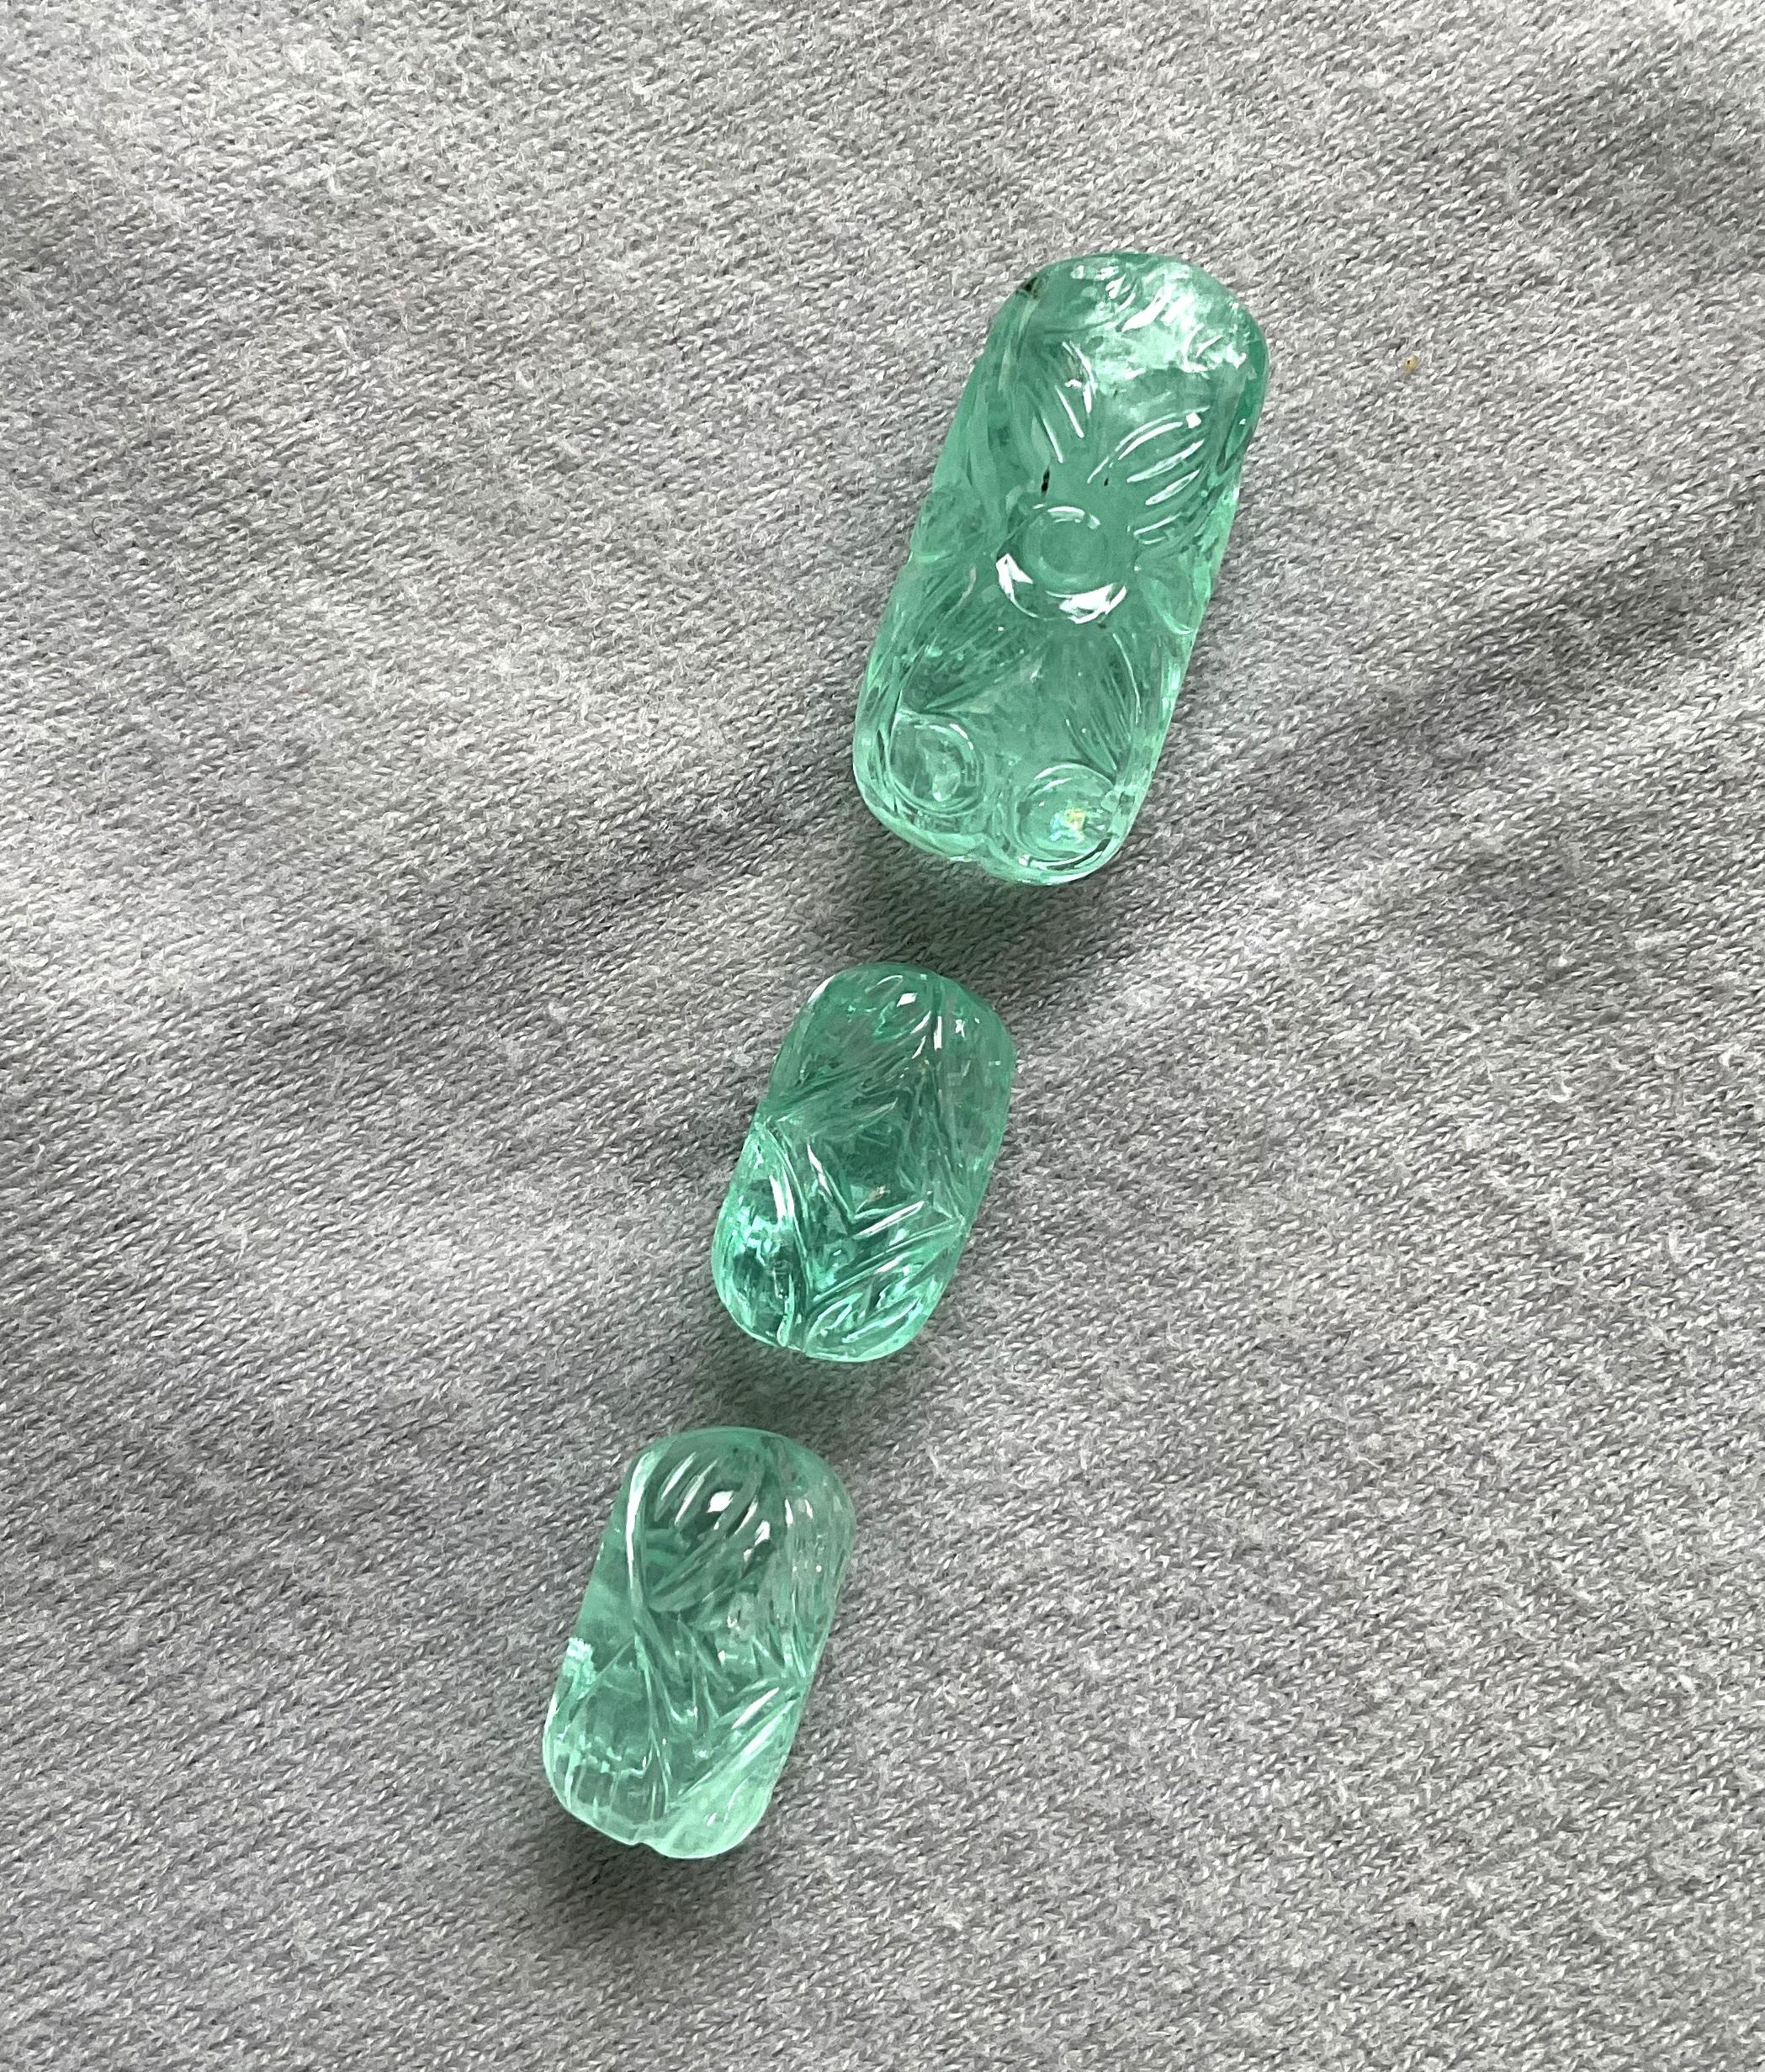 Tumbled 39.93 Carats Russian Emerald Carved 3 Pieces Layout For Jewelry Natural Gemstone For Sale